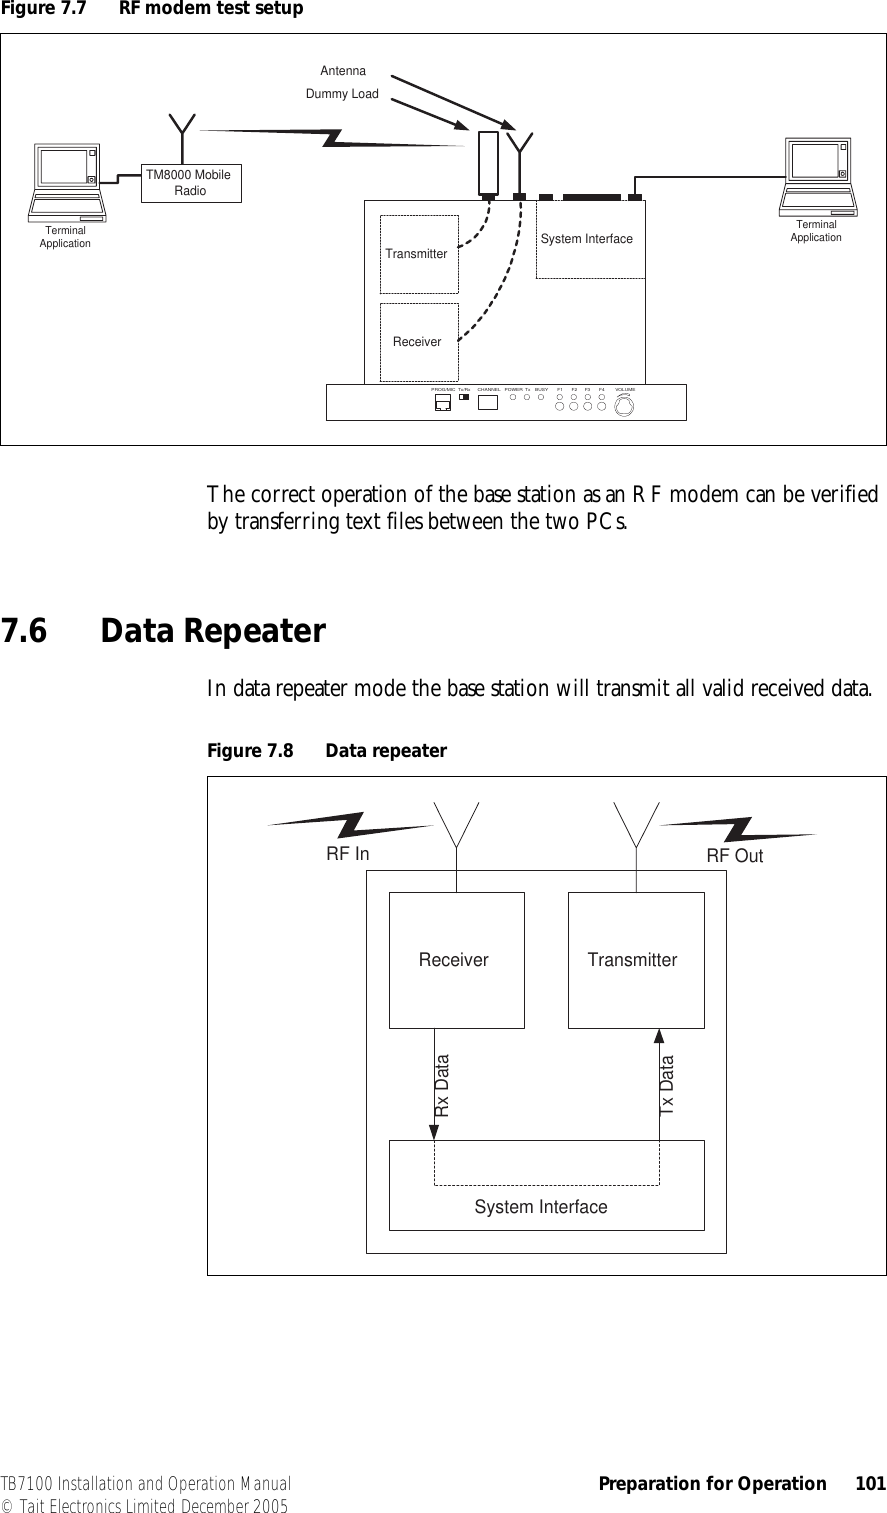  TB7100 Installation and Operation Manual Preparation for Operation 101© Tait Electronics Limited December 2005The correct operation of the base station as an RF modem can be verified by transferring text files between the two PCs. 7.6 Data RepeaterIn data repeater mode the base station will transmit all valid received data.Figure 7.7 RF modem test setupReceiverTransmitter System Interface TerminalApplicationDummy LoadAntennaTerminalApplicationTM8000 MobileRadioPROG/MIC Tx/Rx CHANNEL POWER Tx BUSY F1 F3 F4F2 VOLUMEFigure 7.8 Data repeaterReceiver TransmitterSystem InterfaceRF In RF OutRx DataTx Data